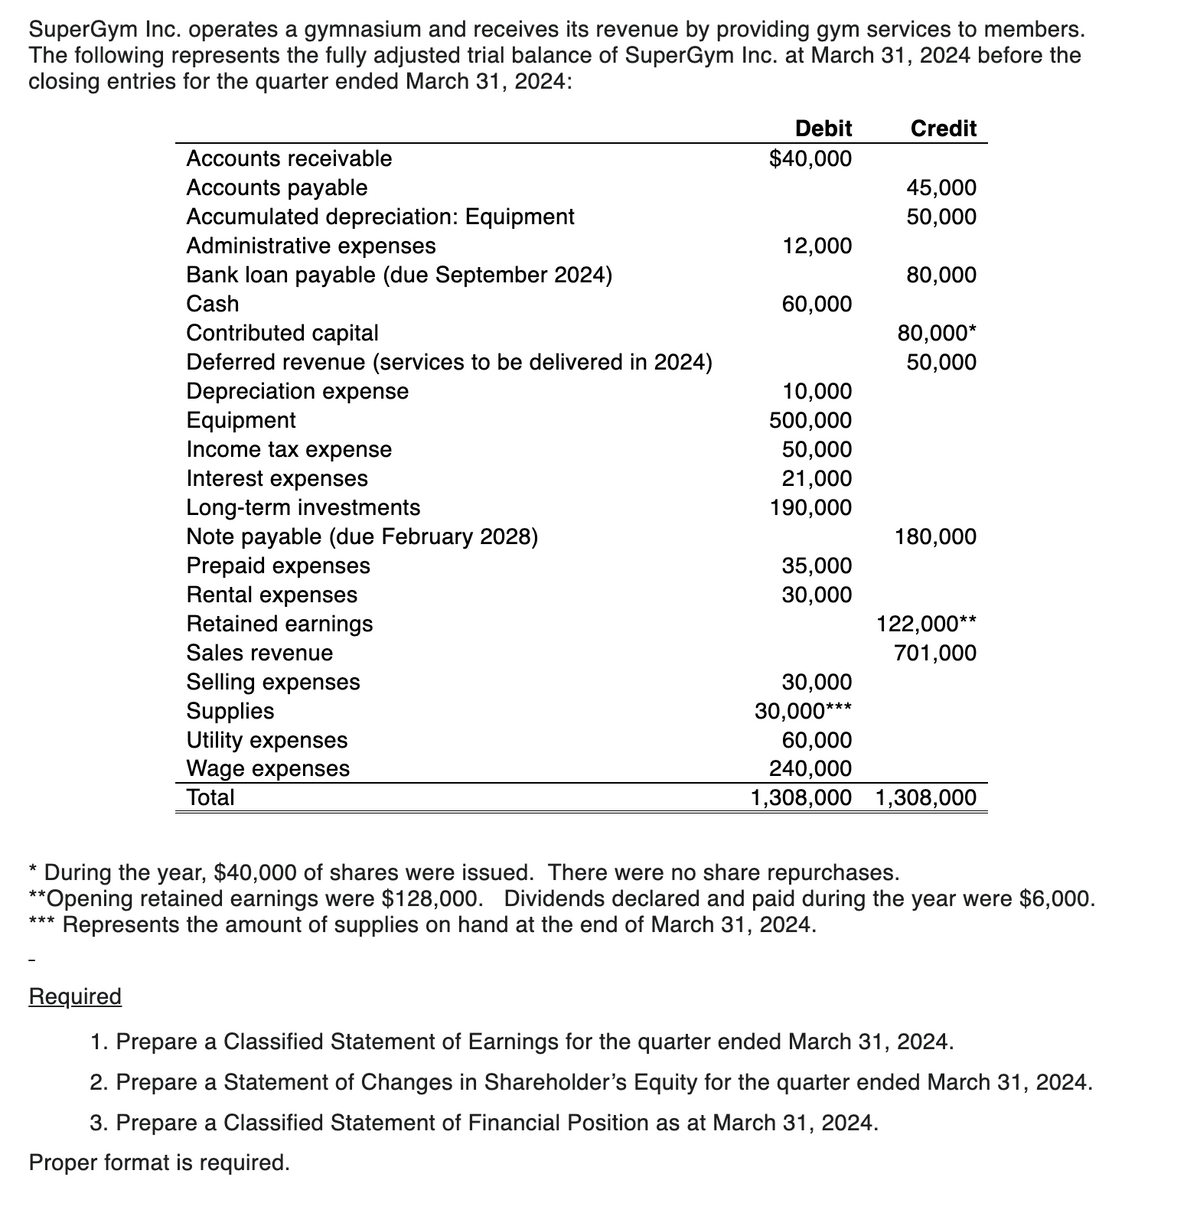 SuperGym Inc. operates a gymnasium and receives its revenue by providing gym services to members.
The following represents the fully adjusted trial balance of SuperGym Inc. at March 31, 2024 before the
closing entries for the quarter ended March 31, 2024:
Accounts receivable
Accounts payable
Accumulated depreciation: Equipment
Administrative expenses
Bank loan payable (due September 2024)
Cash
Contributed capital
Deferred revenue (services to be delivered in 2024)
Depreciation expense
Equipment
Income tax expense
Interest expenses
Long-term investments
Note payable (due February 2028)
Prepaid expenses
Rental expenses
Retained earnings
Sales revenue
Selling expenses
Supplies
Utility expenses
Wage expenses
Total
Debit
$40,000
12,000
60,000
10,000
500,000
50,000
21,000
190,000
35,000
30,000
Credit
45,000
50,000
80,000
80,000*
50,000
180,000
122,000**
701,000
30,000
30,000***
60,000
240,000
1,308,000 1,308,000
* During the year, $40,000 of shares were issued. There were no share repurchases.
**Opening retained earnings were $128,000. Dividends declared and paid during the year were $6,000.
*** Represents the amount of supplies on hand at the end of March 31, 2024.
Required
1. Prepare a Classified Statement of Earnings for the quarter ended March 31, 2024.
2. Prepare a Statement of Changes in Shareholder's Equity for the quarter ended March 31, 2024.
3. Prepare a Classified Statement of Financial Position as at March 31, 2024.
Proper format is required.